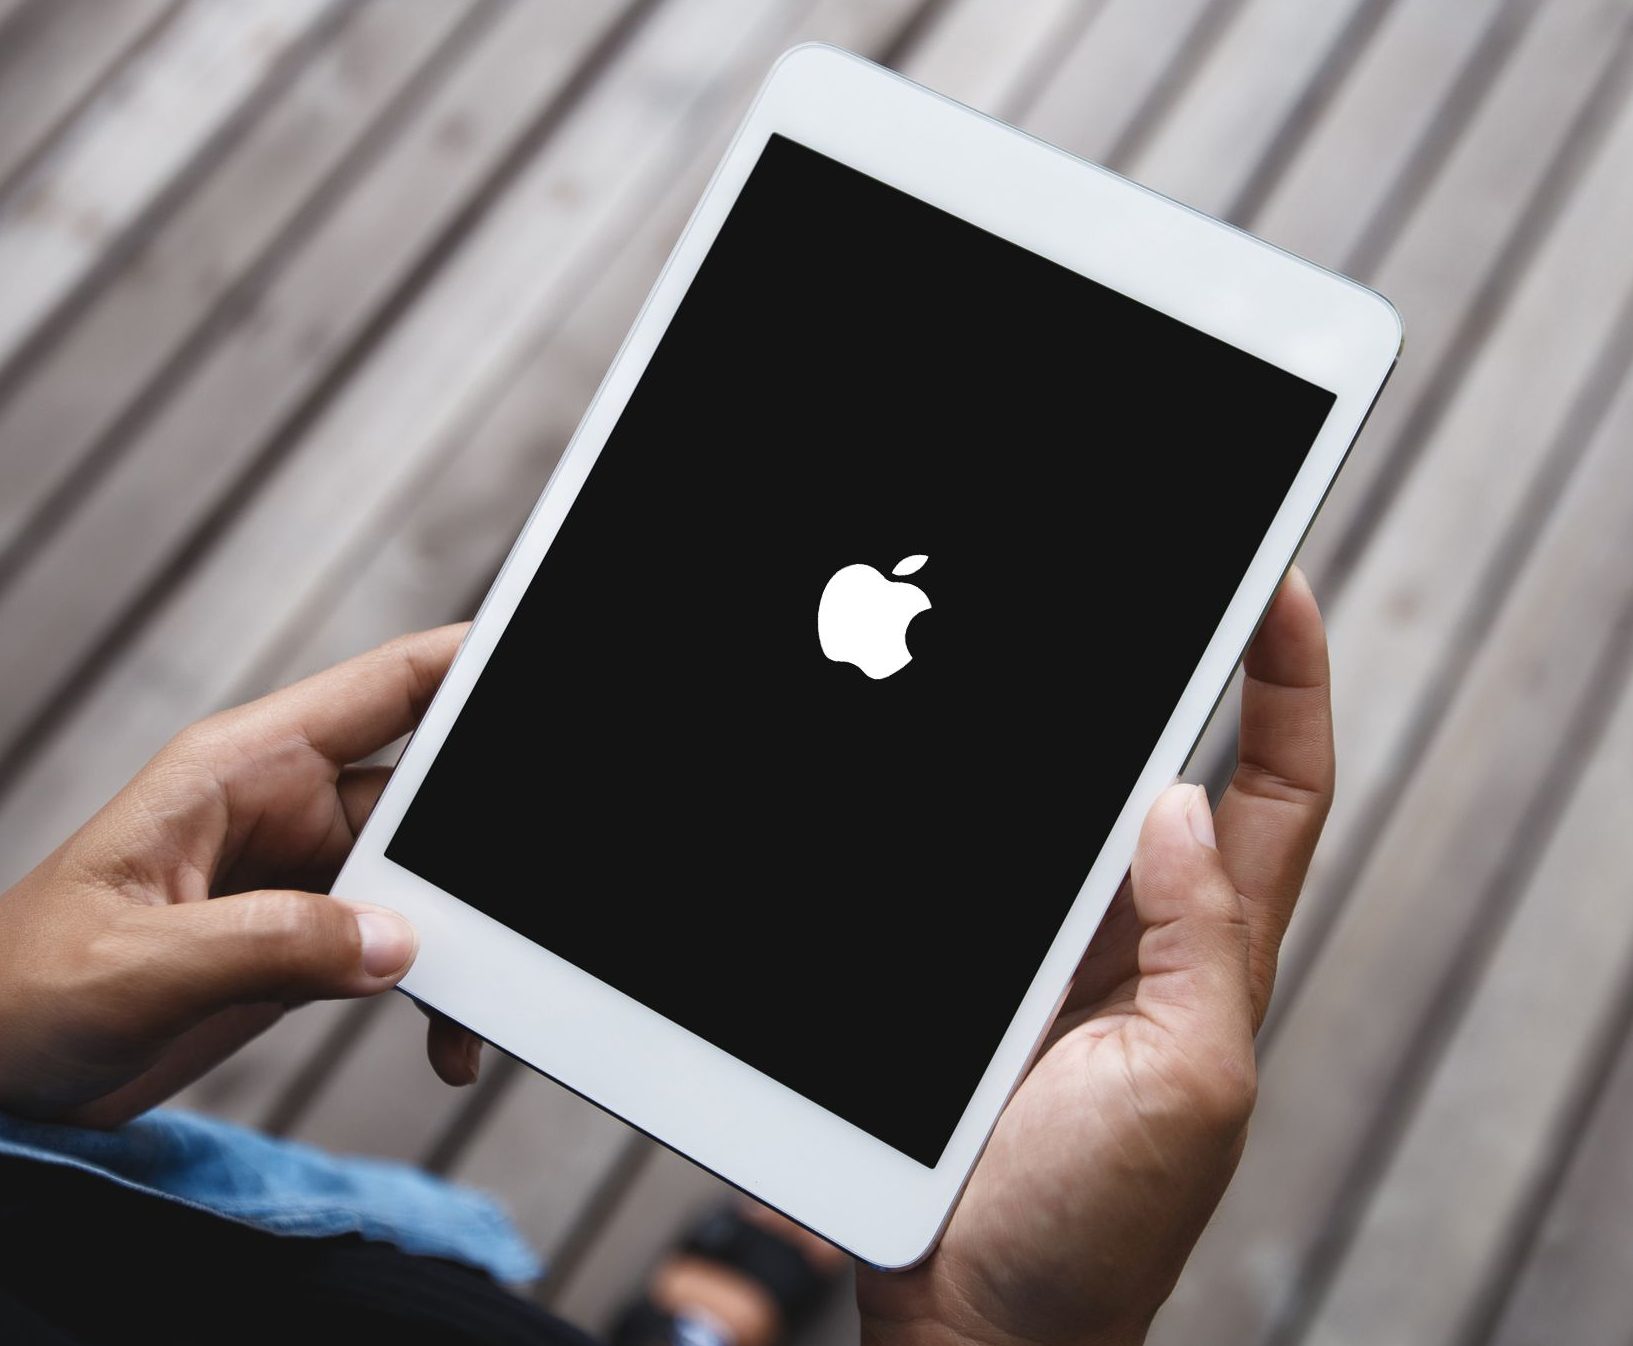 How To Fix It When An IPad Won’t Turn Off